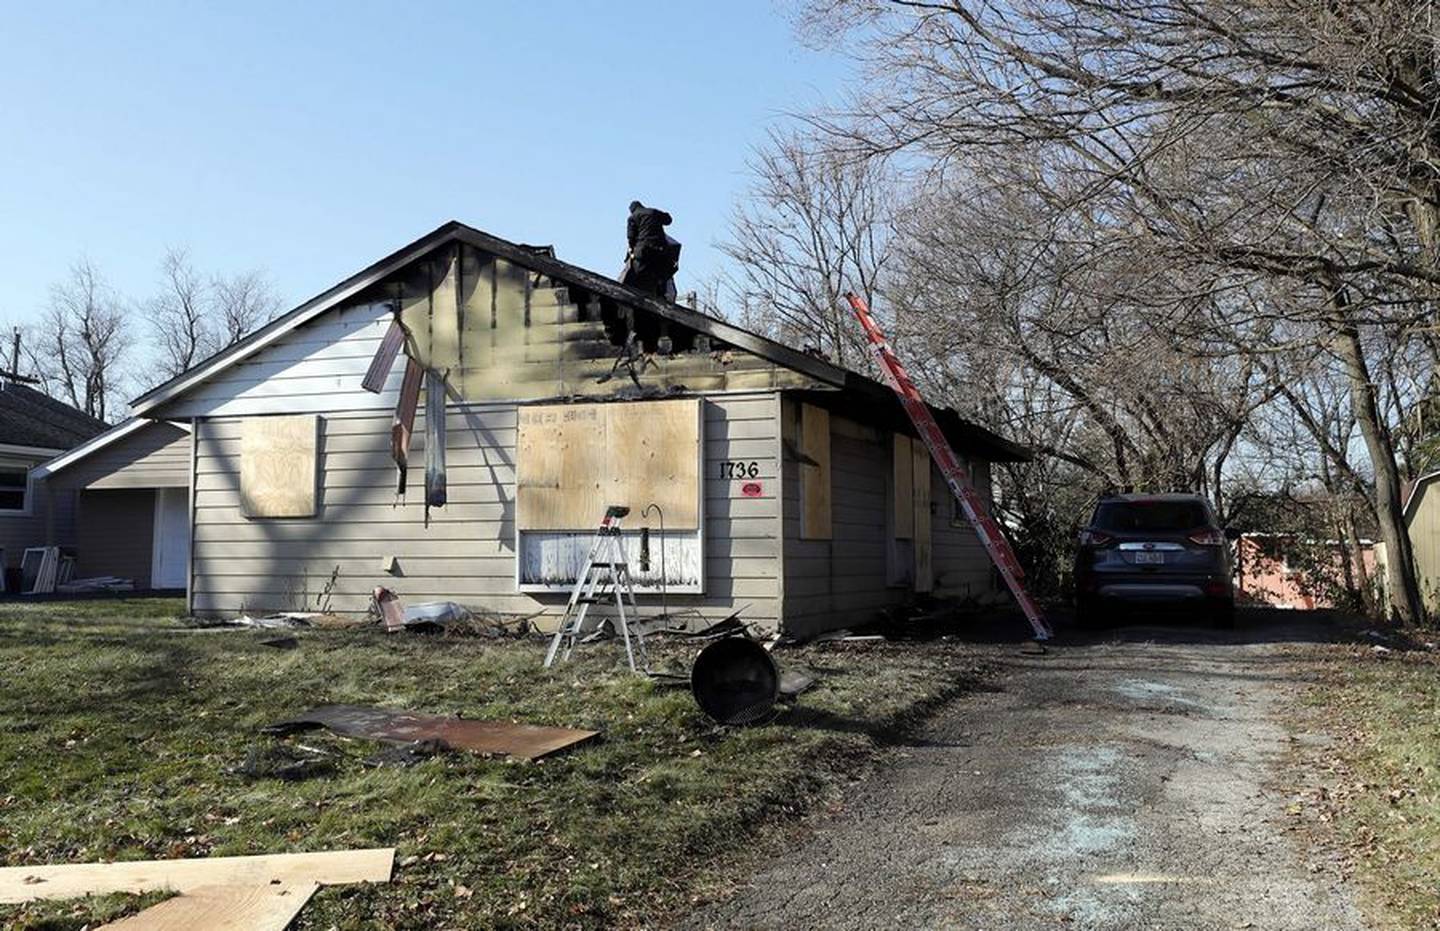 Workers secure the scene of a fatal fire that took place early the morning of Wednesday, Nov. 23, 2022, in the 700 block of Papoose Road in Carpentersville.